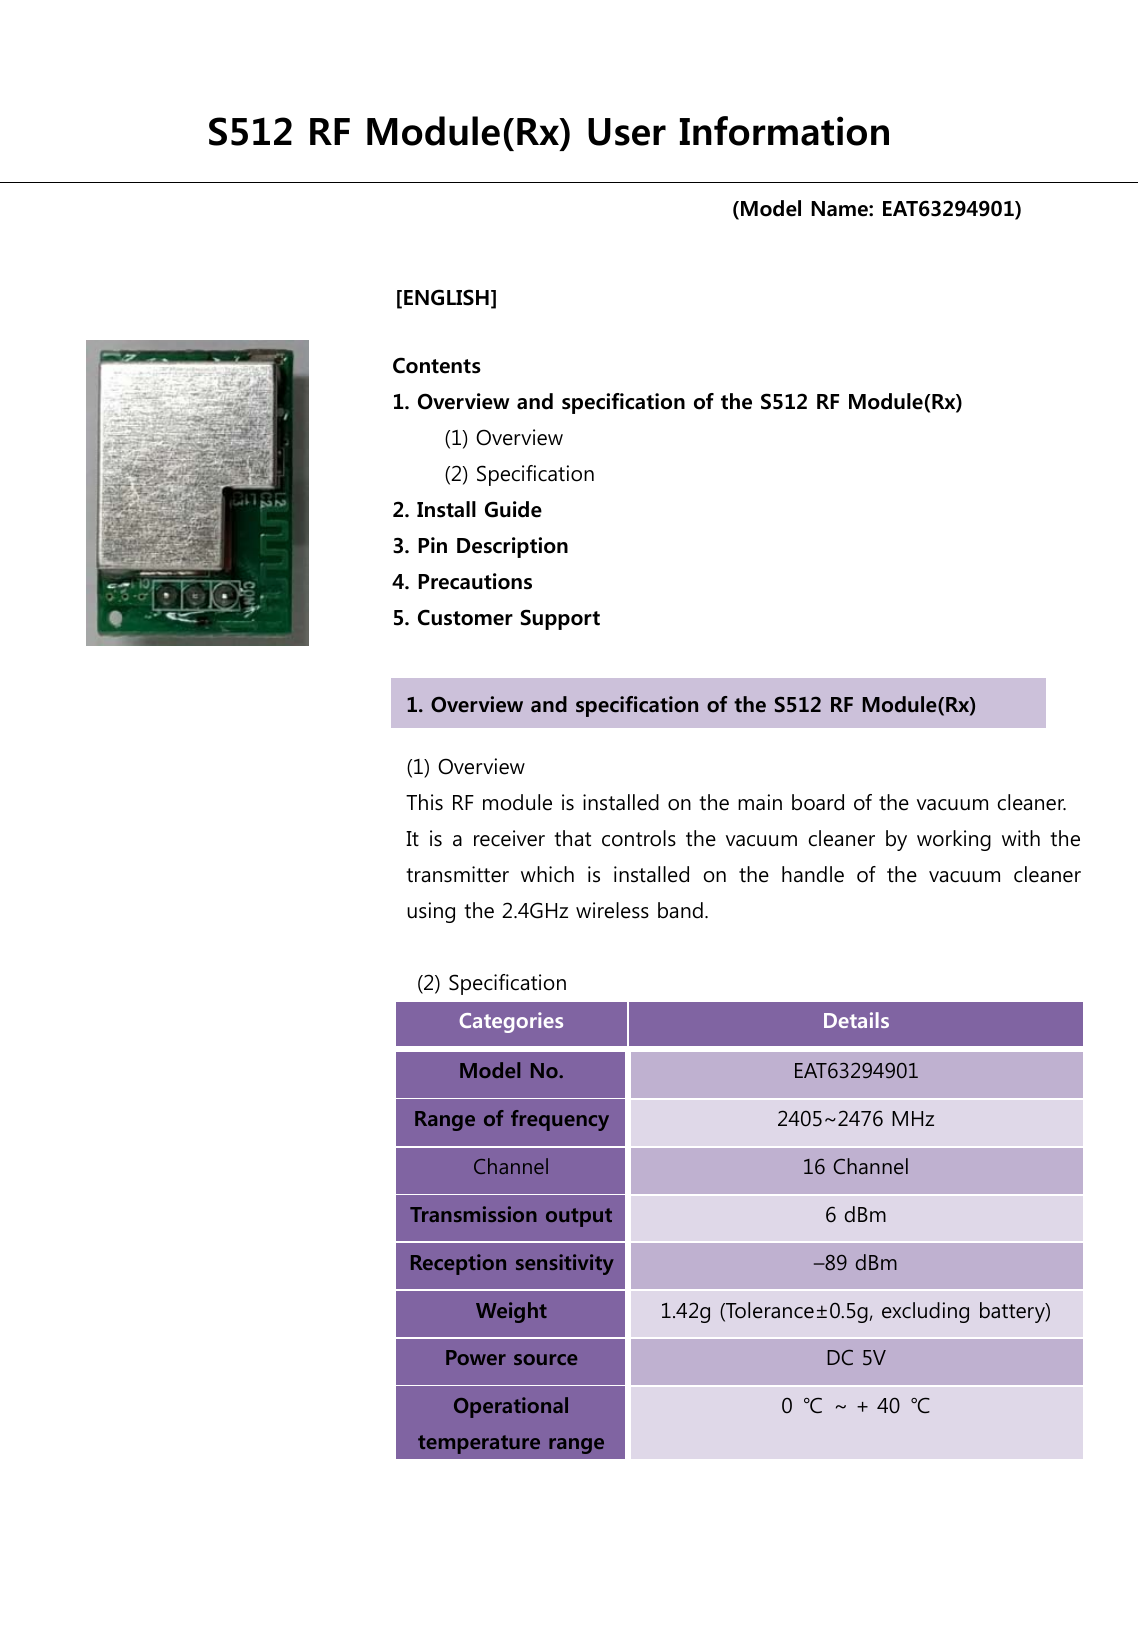                                      [ENGLISH]                                     S512 RF Module(Rx) User Information (Model Name: EAT63294901) Contents 1. Overview and specification of the S512 RF Module(Rx)        (1) Overview      (2) Specification  2. Install Guide 3. Pin Description 4. Precautions   5. Customer Support (1) Overview   This RF module is installed on the main board of the vacuum cleaner. It is a receiver that controls the vacuum cleaner by working with the transmitter  which  is  installed  on  the  handle  of  the  vacuum  cleaner using the 2.4GHz wireless band.    (2) Specification Categories  Details Model No.  EAT63294901 Range of frequency 2405~2476 MHz   Channel 16 Channel Transmission output 6 dBm Reception sensitivity –89 dBm Weight  1.42g (Tolerance±0.5g, excluding battery) Power source  DC 5V Operational temperature range 0  ℃  ~ + 40  ℃  1. Overview and specification of the S512 RF Module(Rx) 